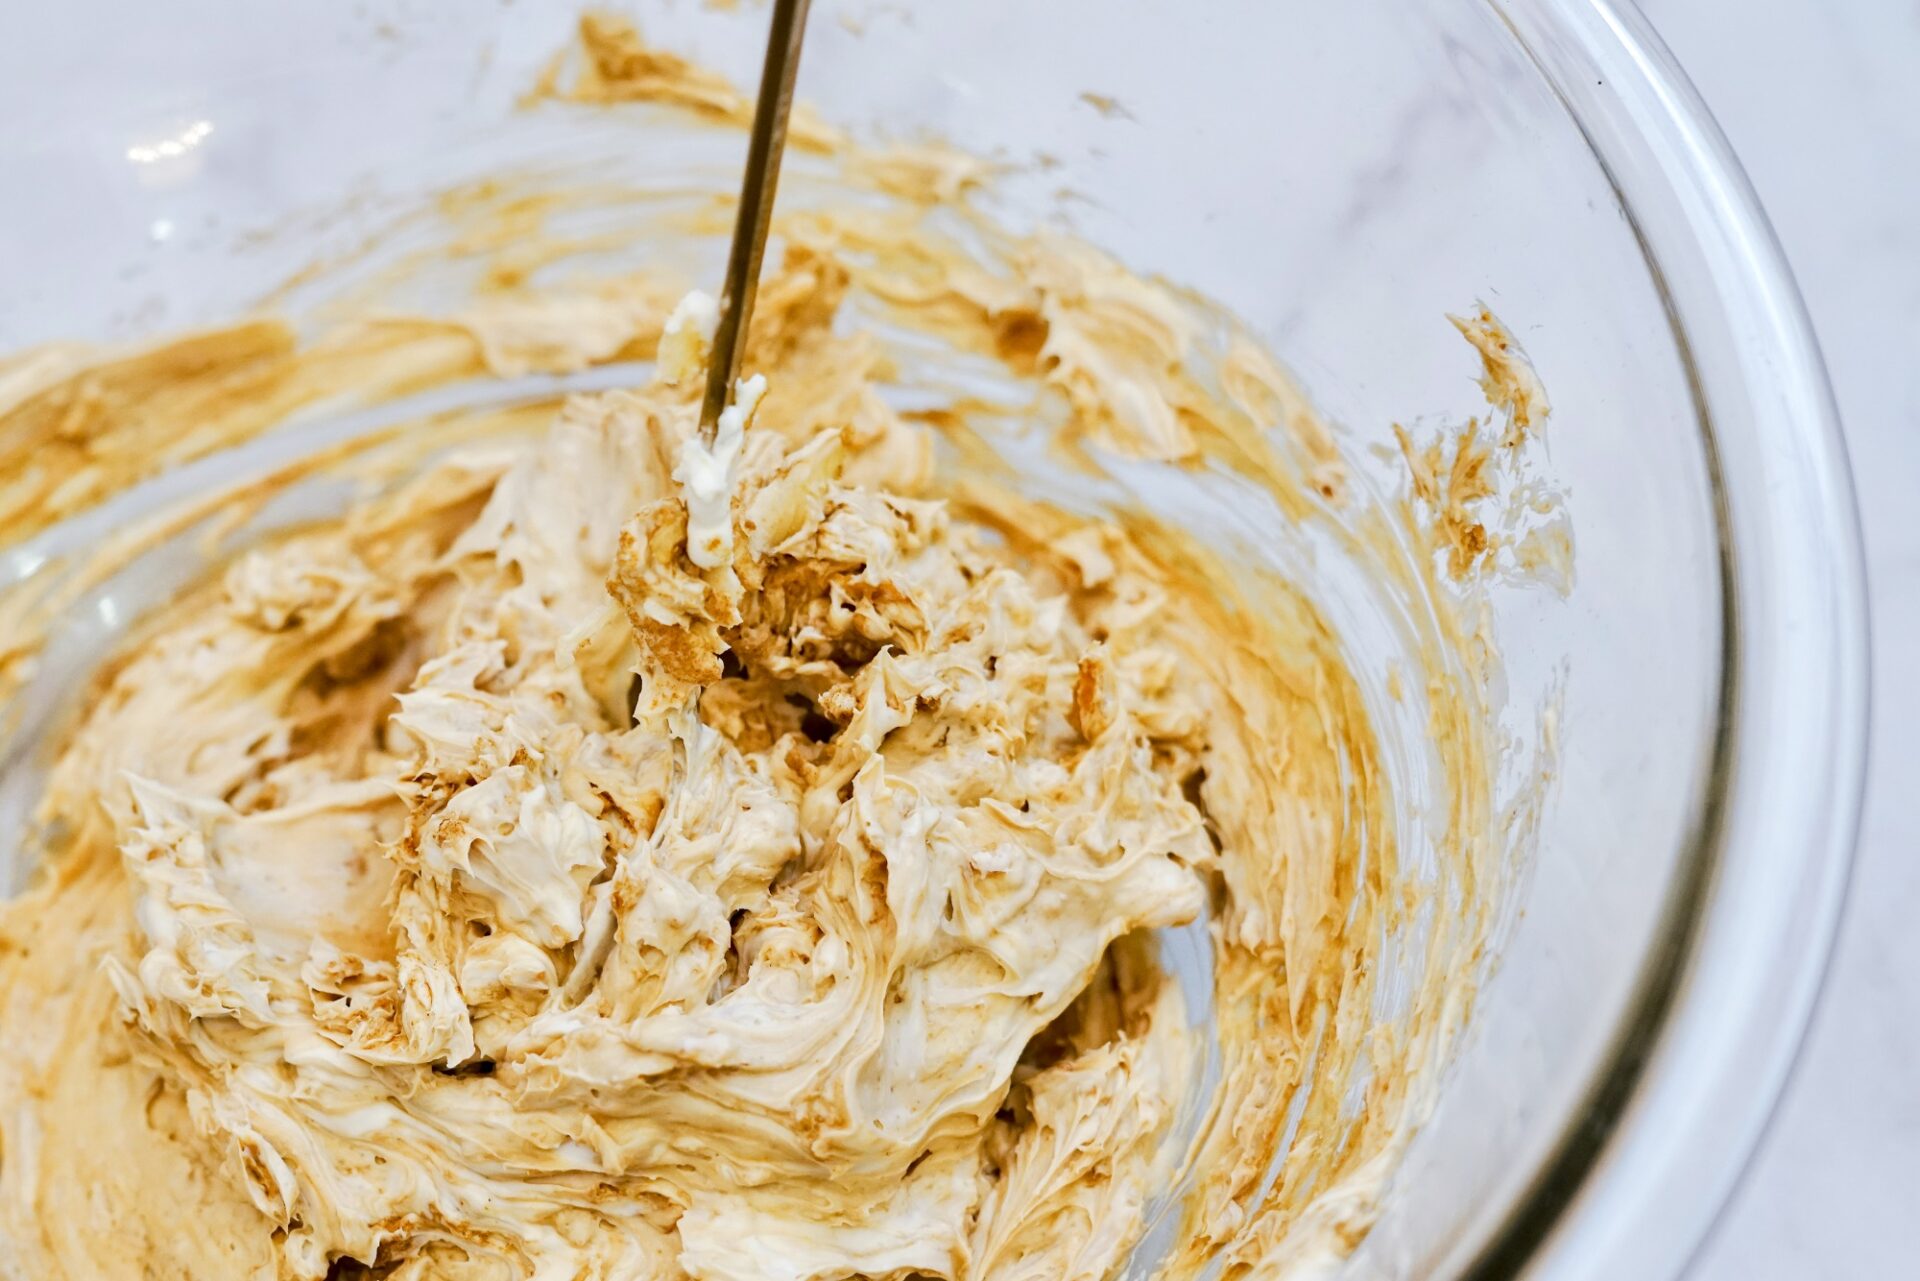 Mixing cream cheese and onion dip mix in a bowl.